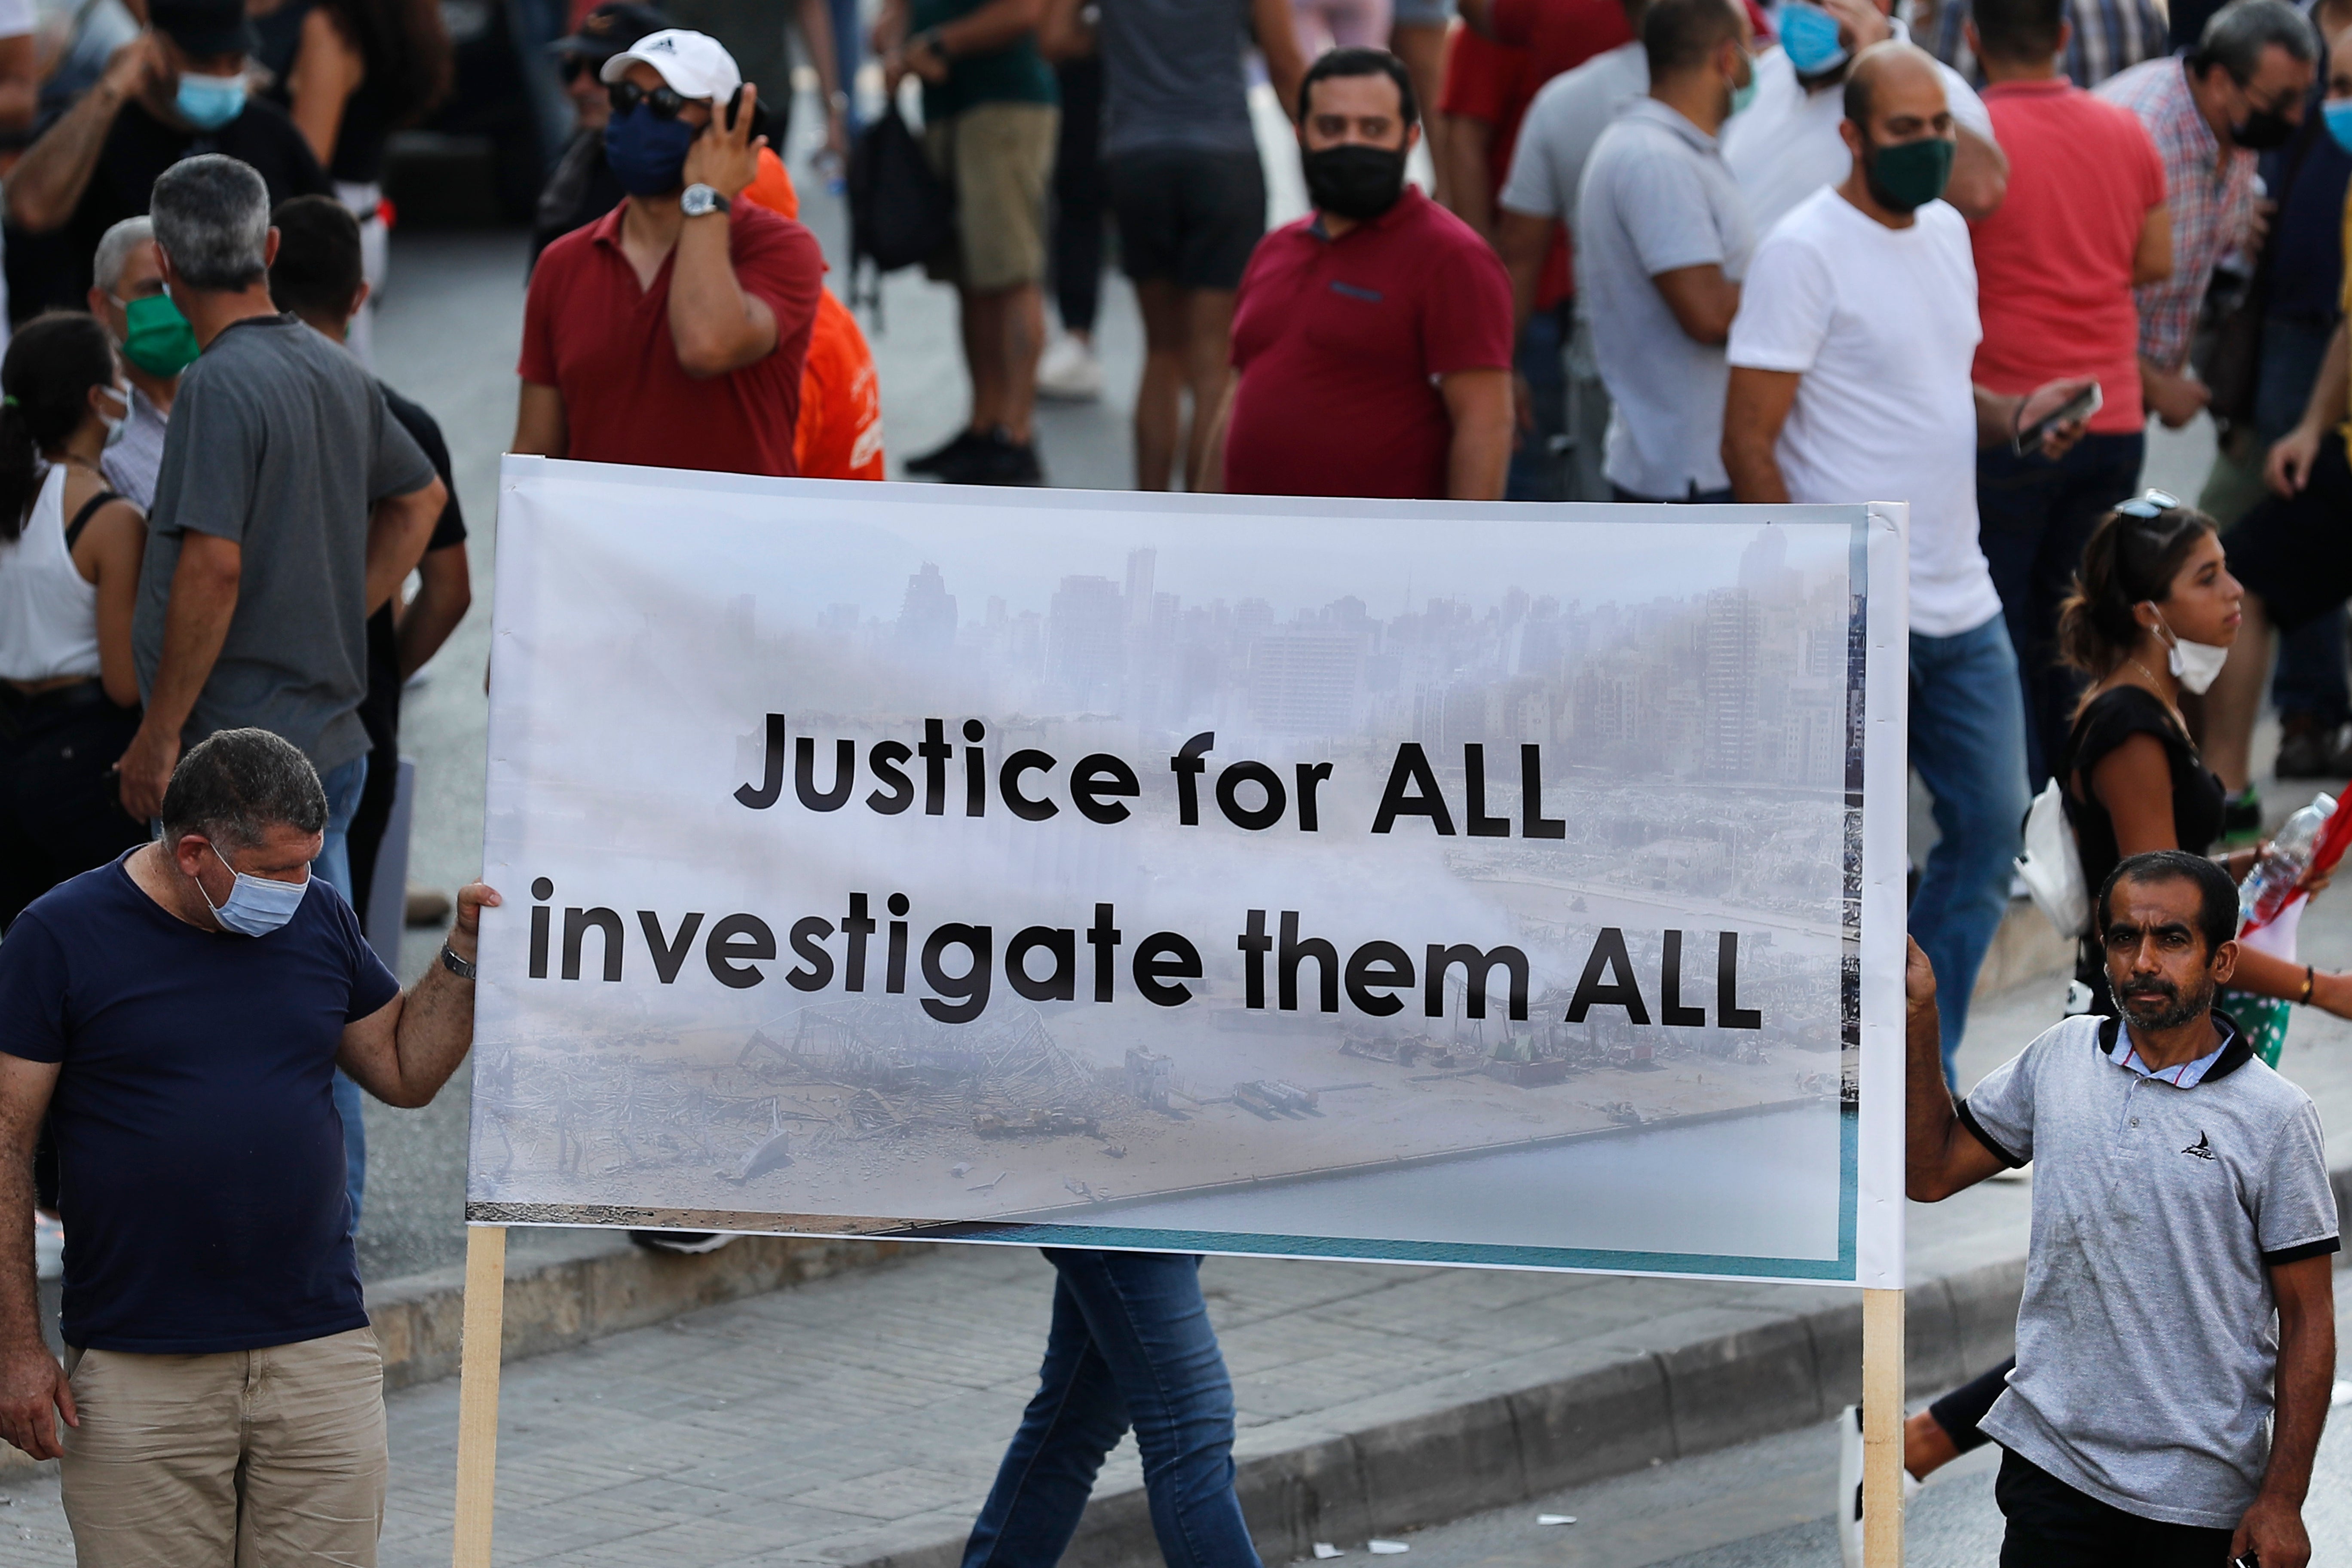 Lebanese supporters of President Michel Aoun hold a banner during a protest calling for "truth and justice" in relation to the Aug. 4 explosion that devastated Beirut port and parts of the Lebanese capital